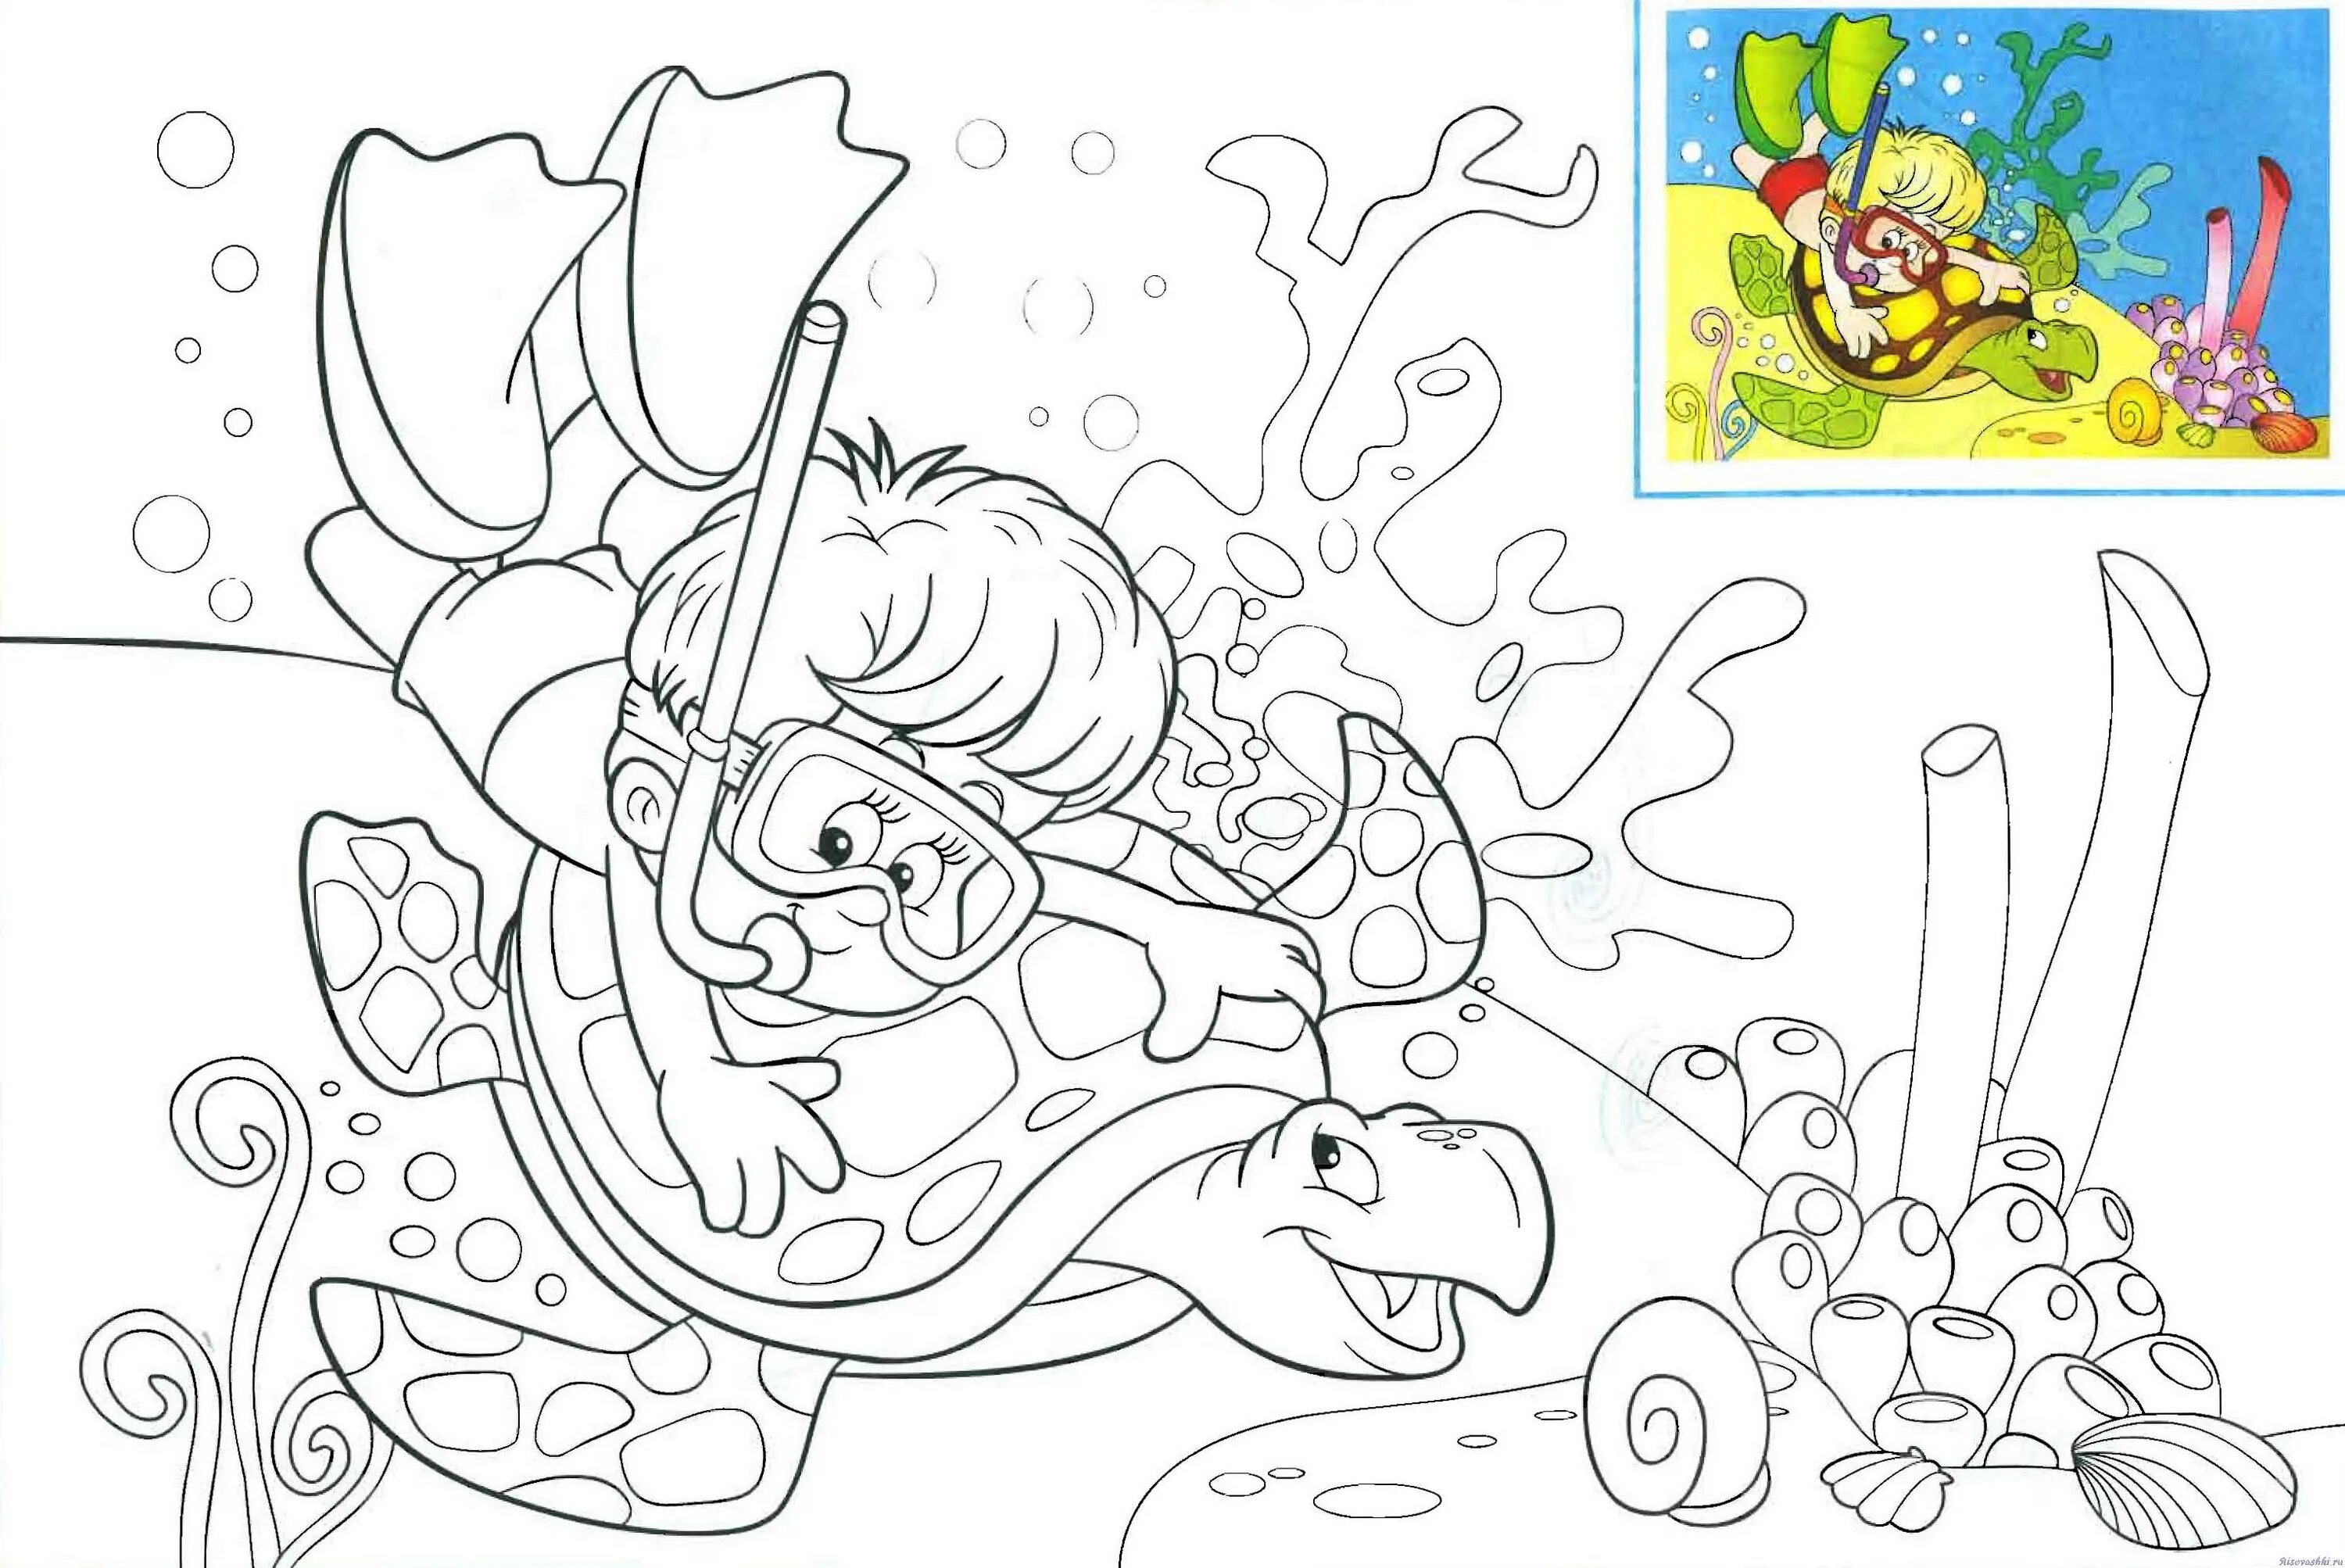 Humorous coloring book for a fairy tale case with a Yevseyka